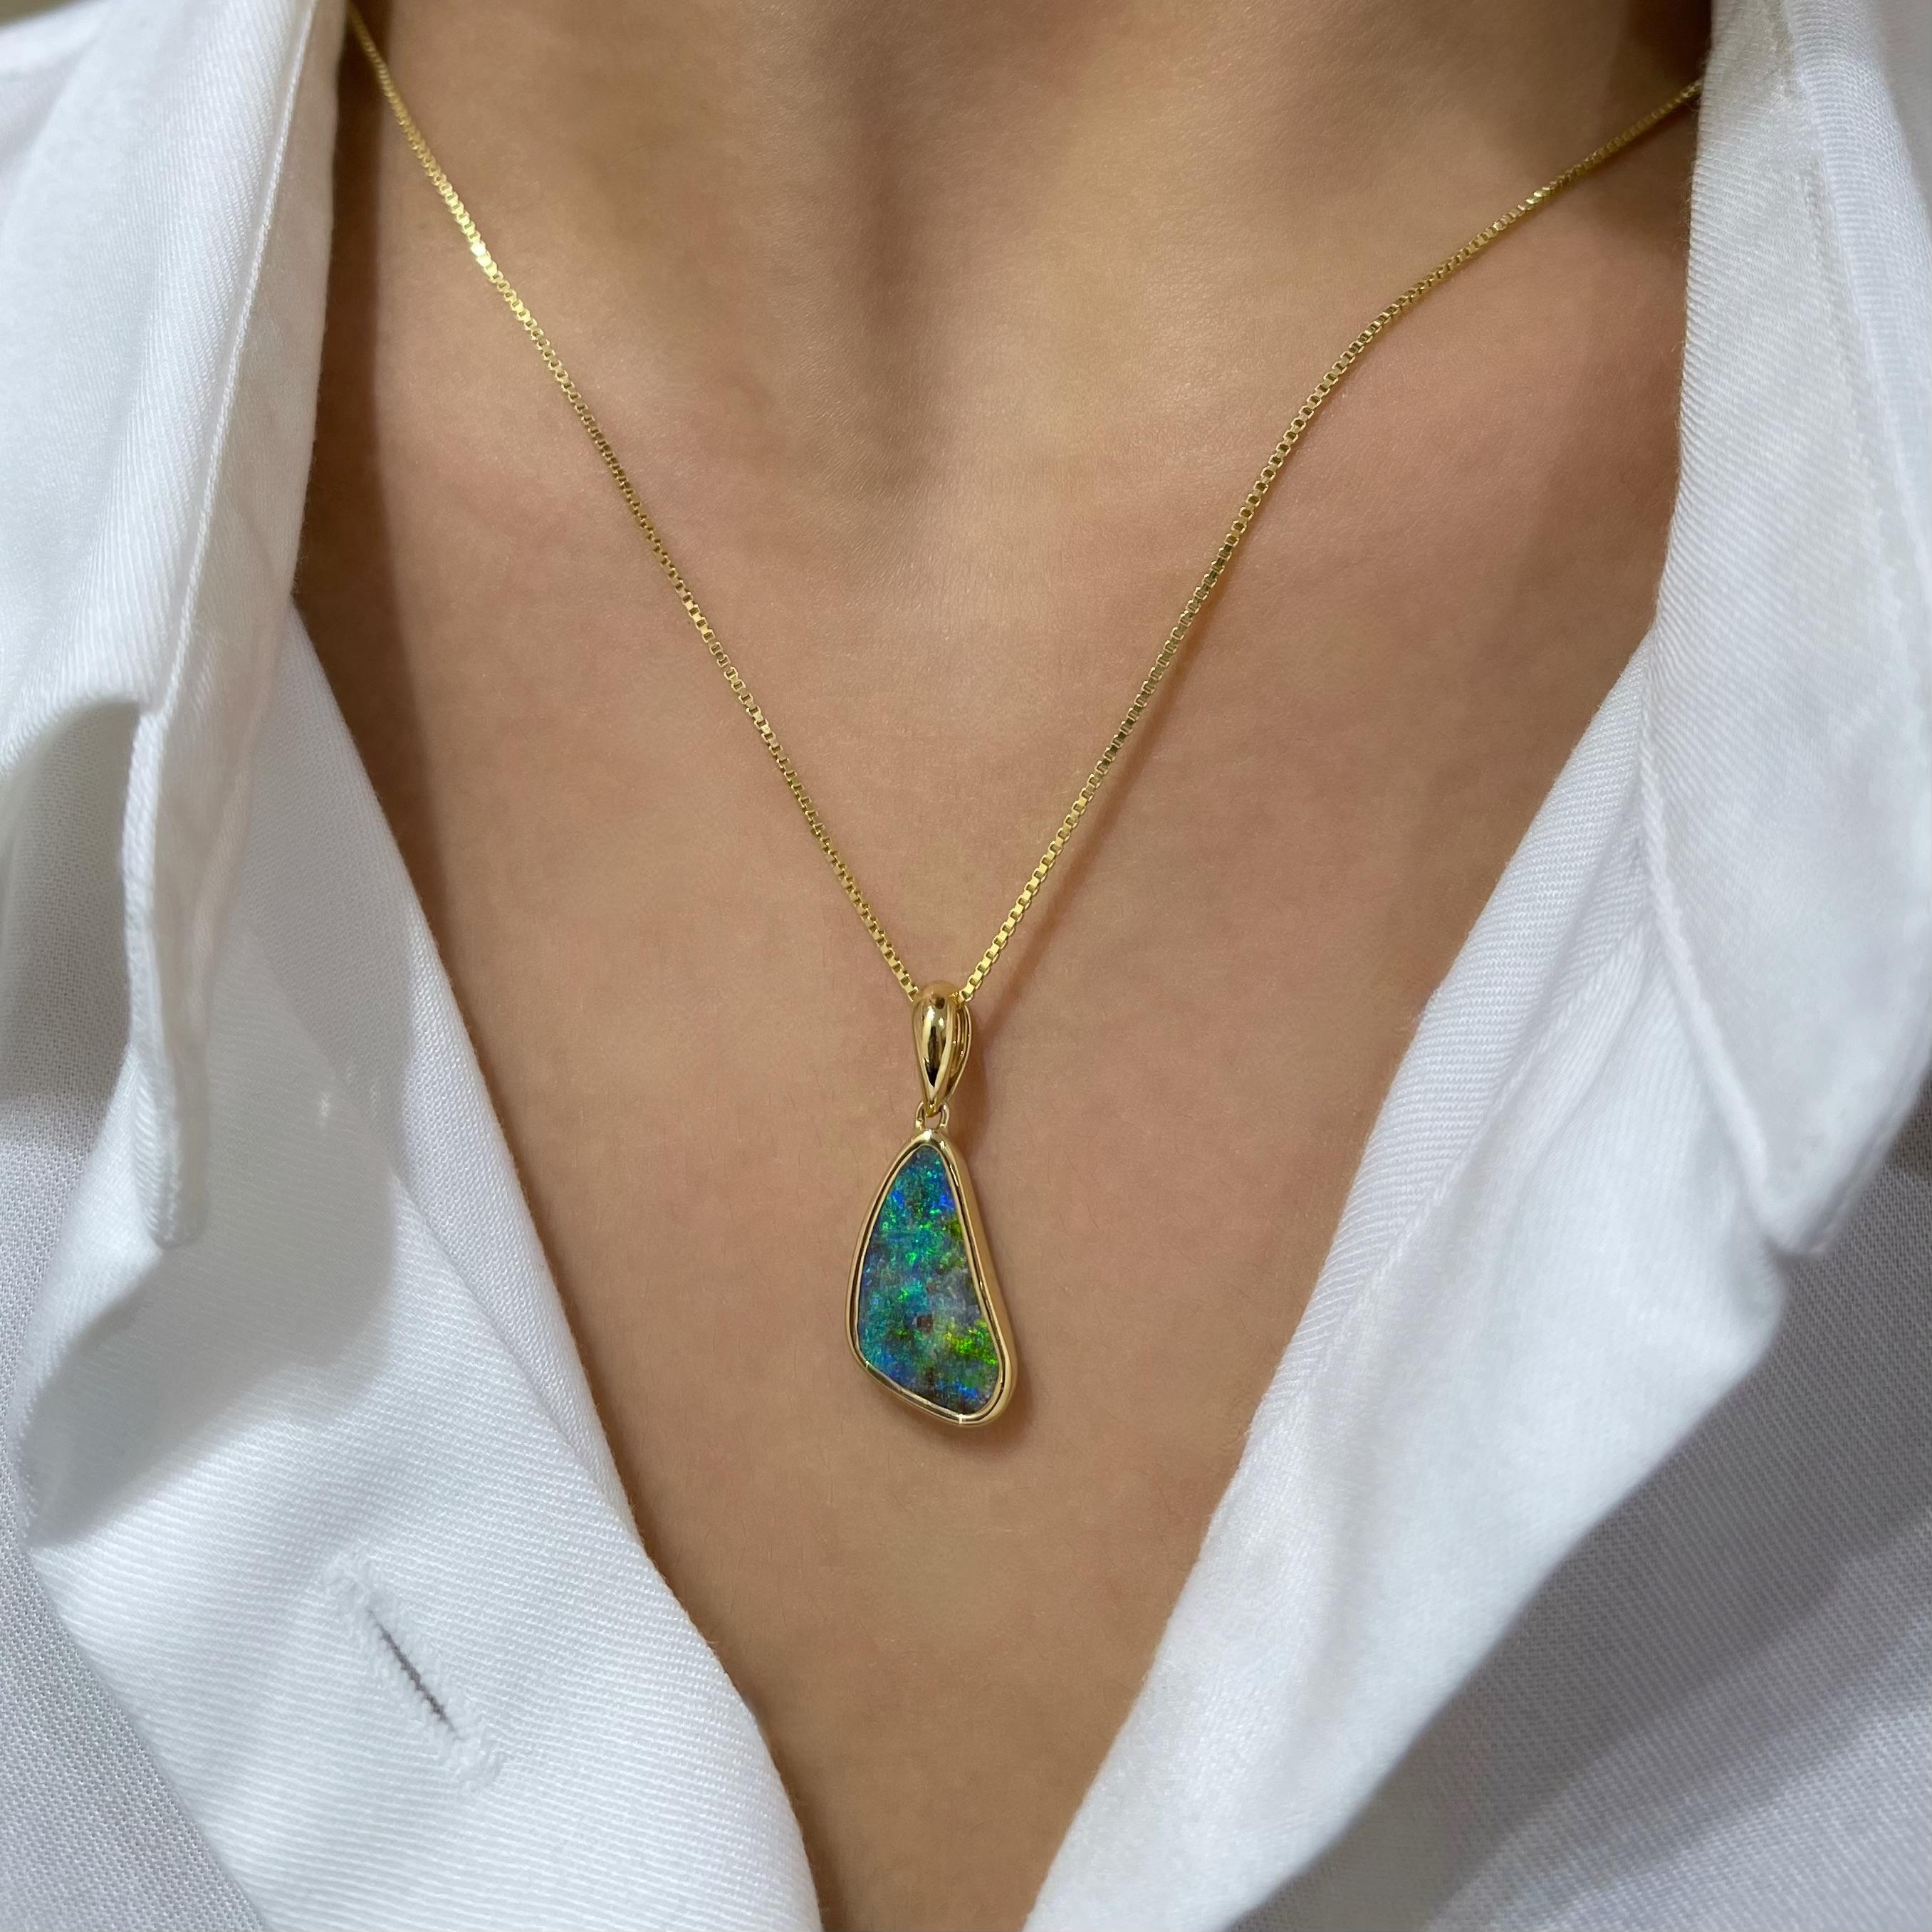 The “You and Me” opal pendant features a precious boulder opal (3.91ct) with a striking design, sourced from Winton, Australia. Set in our glamorous 18K yellow gold, the captivating hues of green, blue and yellow send out a message of companionship